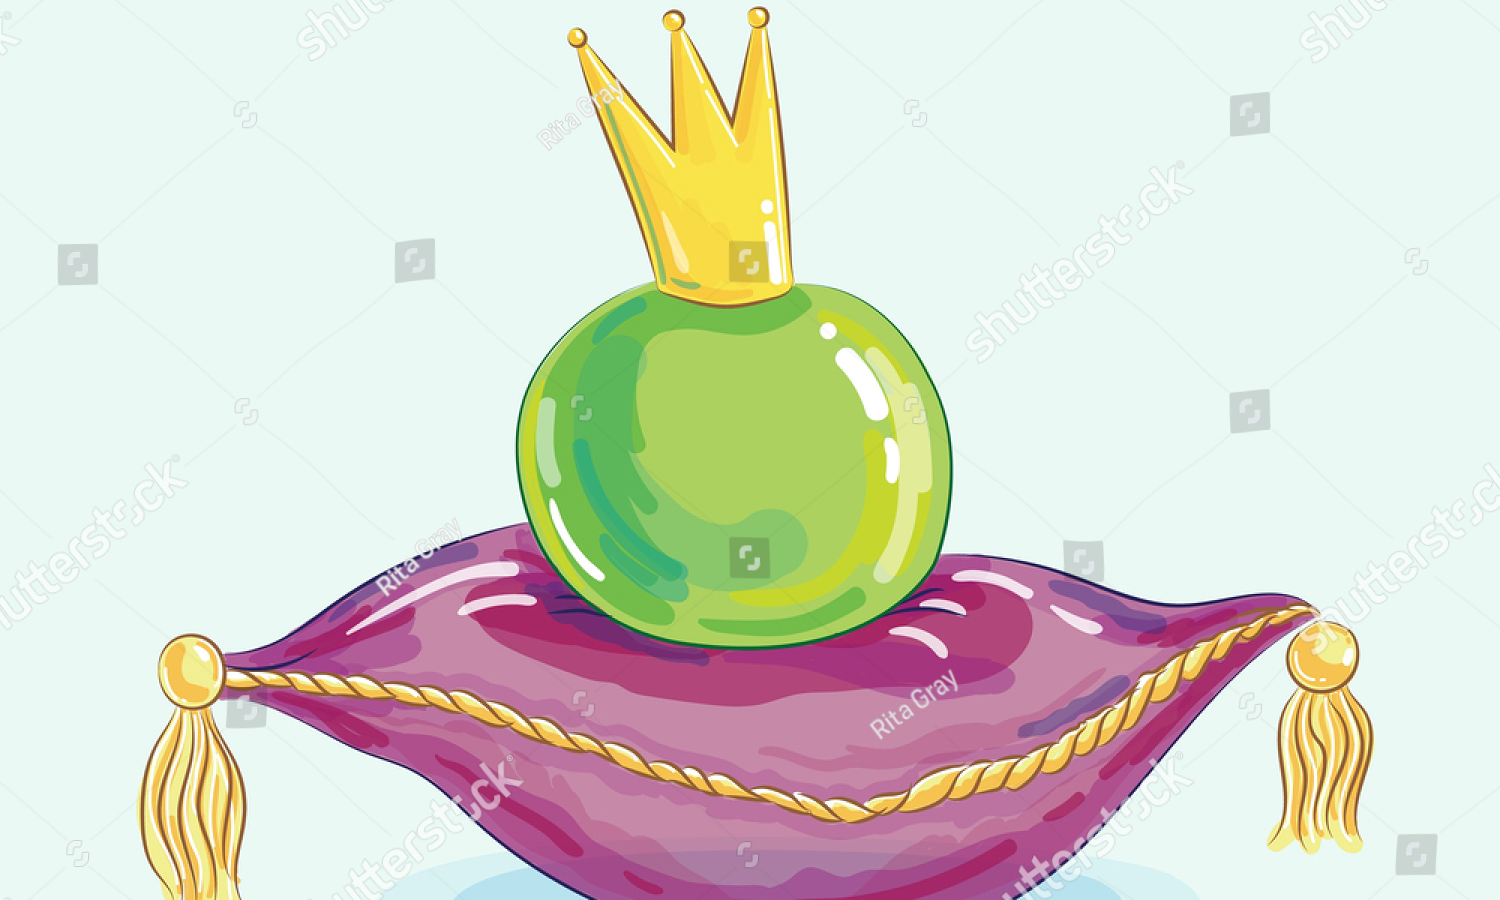 a cartoon pea sitting on a magenta pillow with yellow tassels and wearing a gold crown